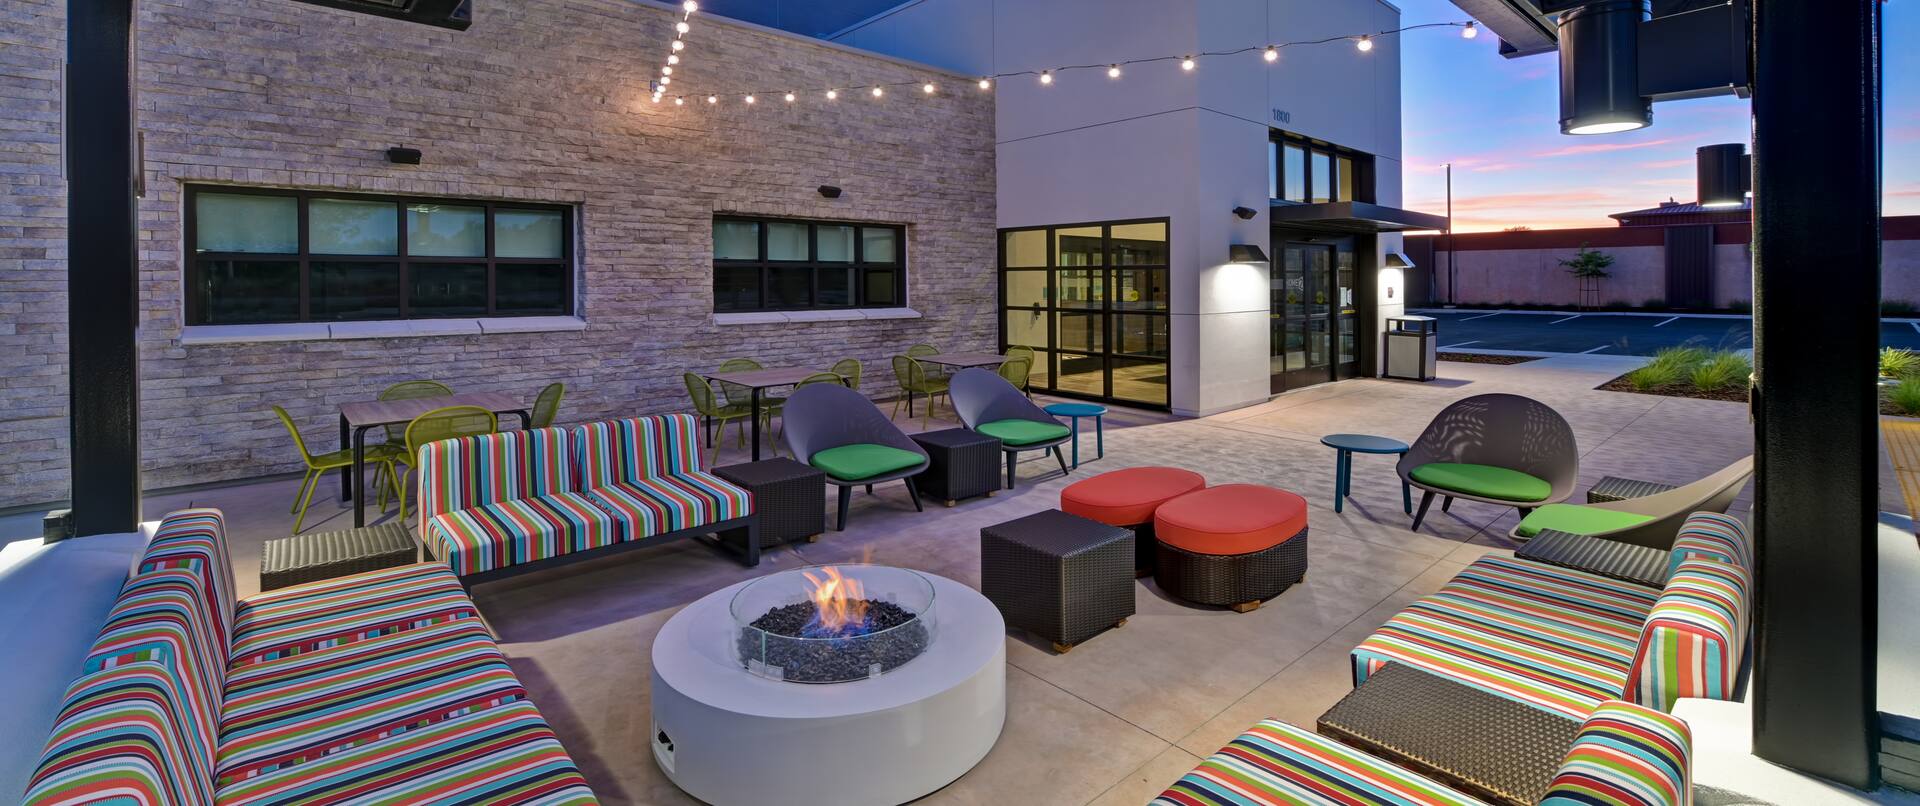 outdoor patio with firepit at dusk